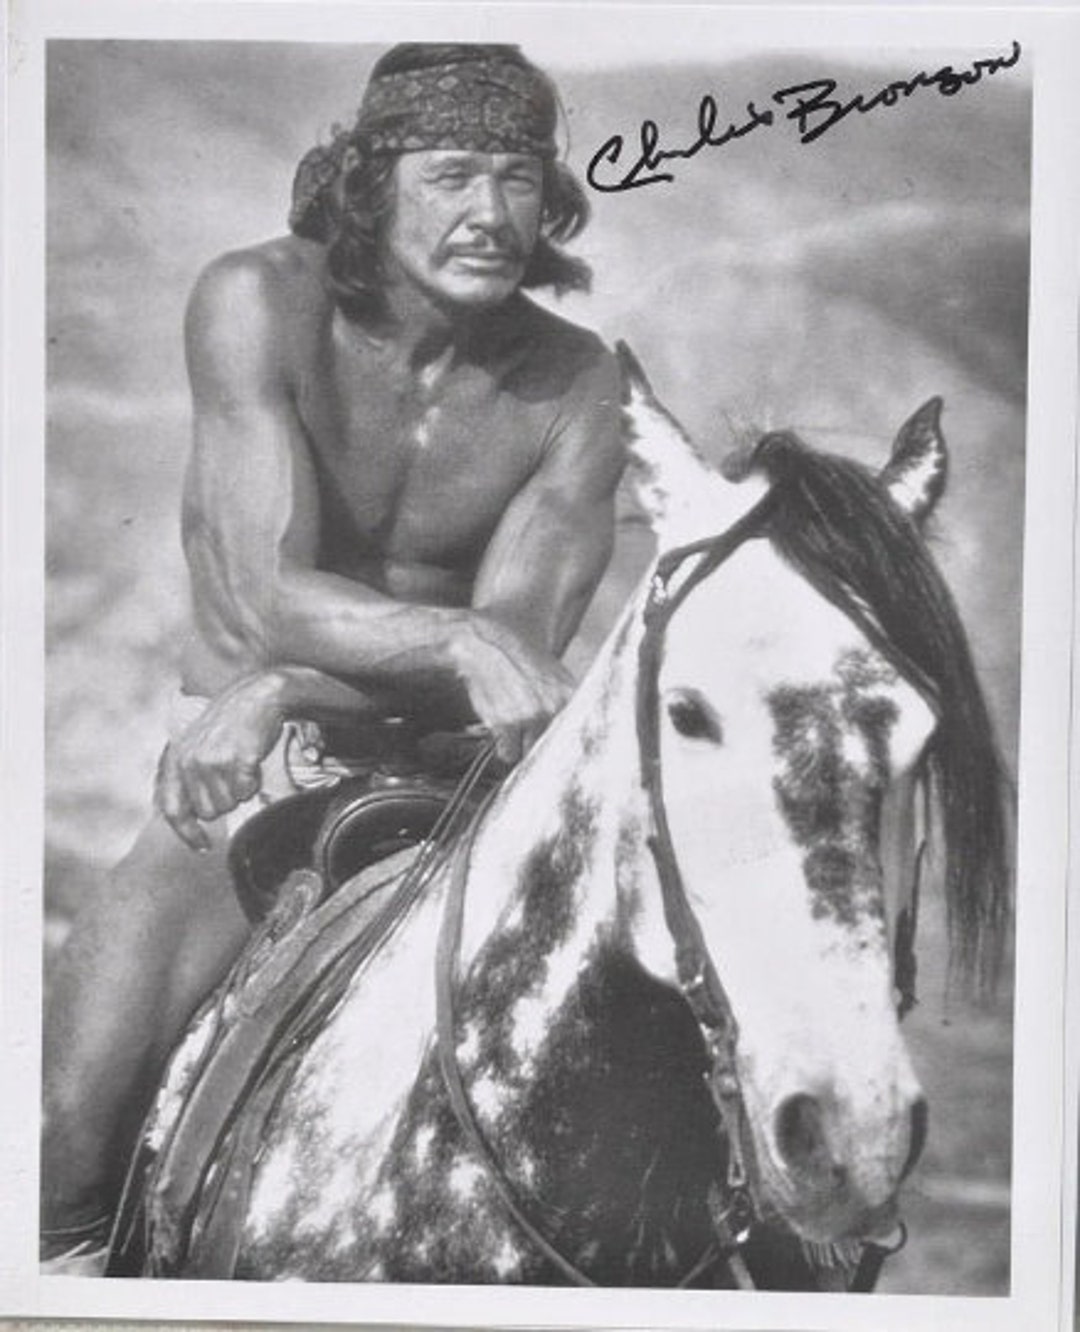 CHARLES BRONSON Signed Photo CHATOS Land the Dirty picture